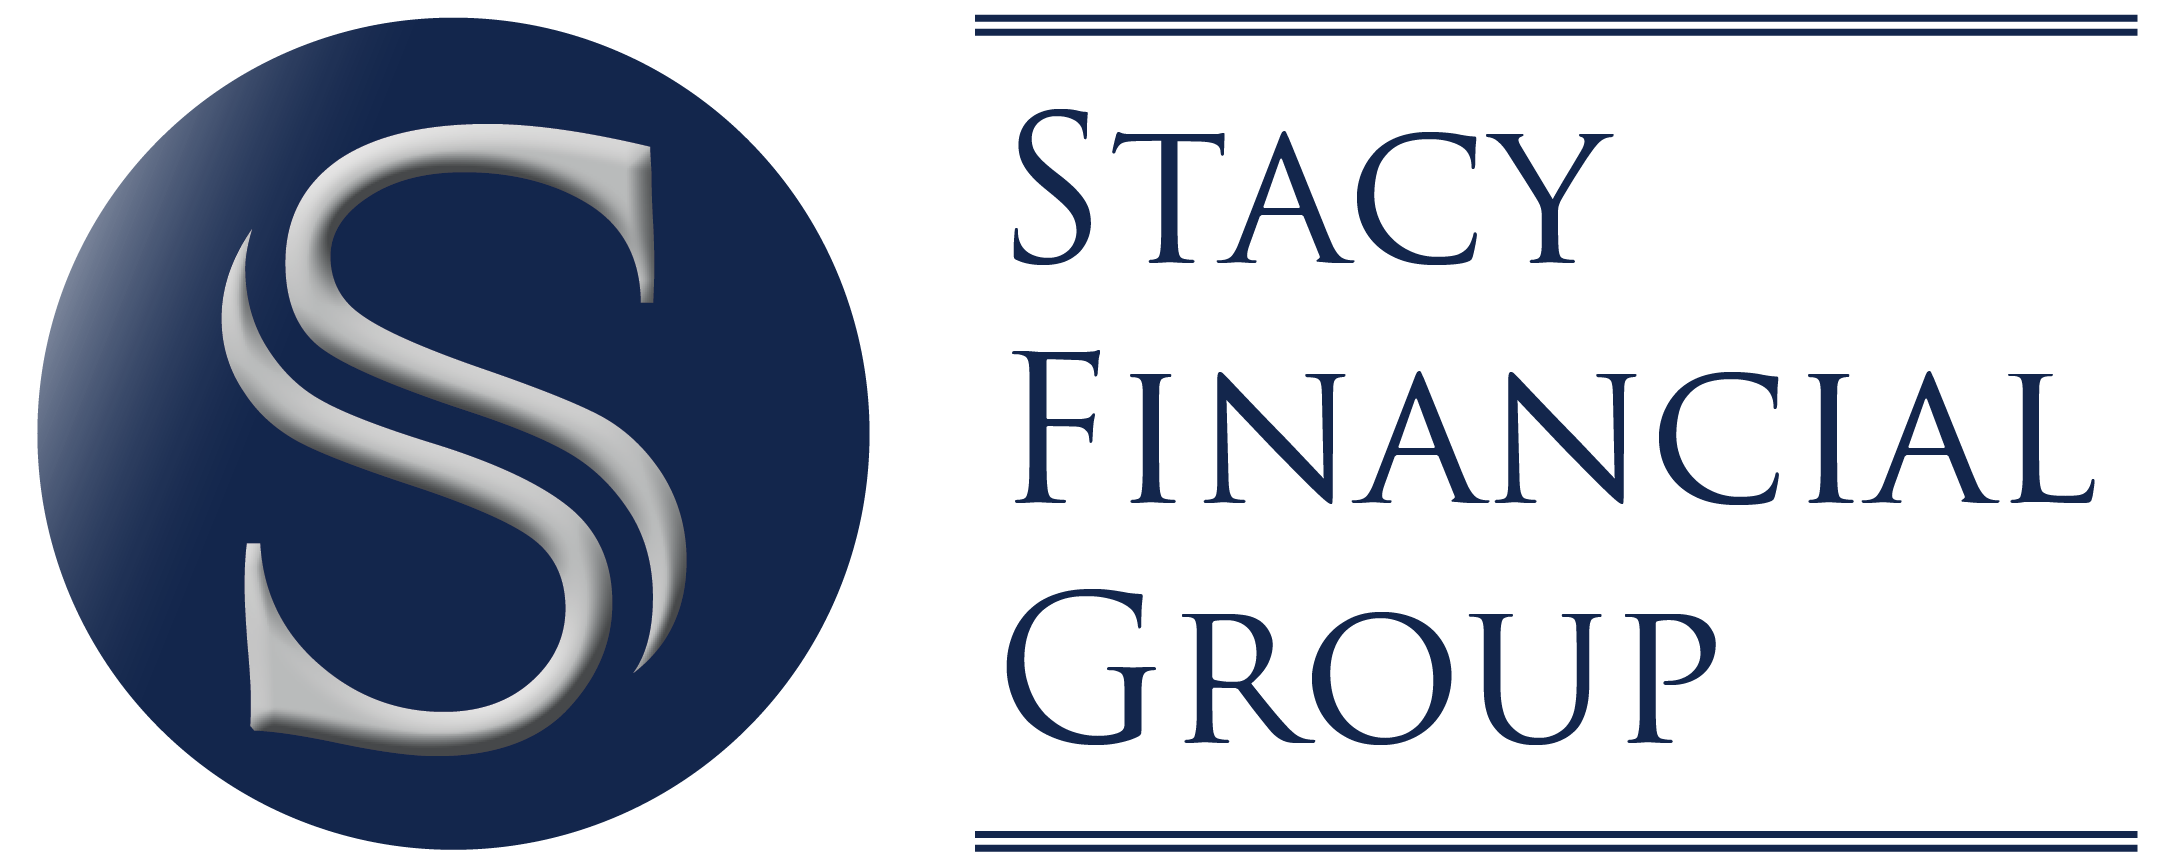 stacy financial group logo